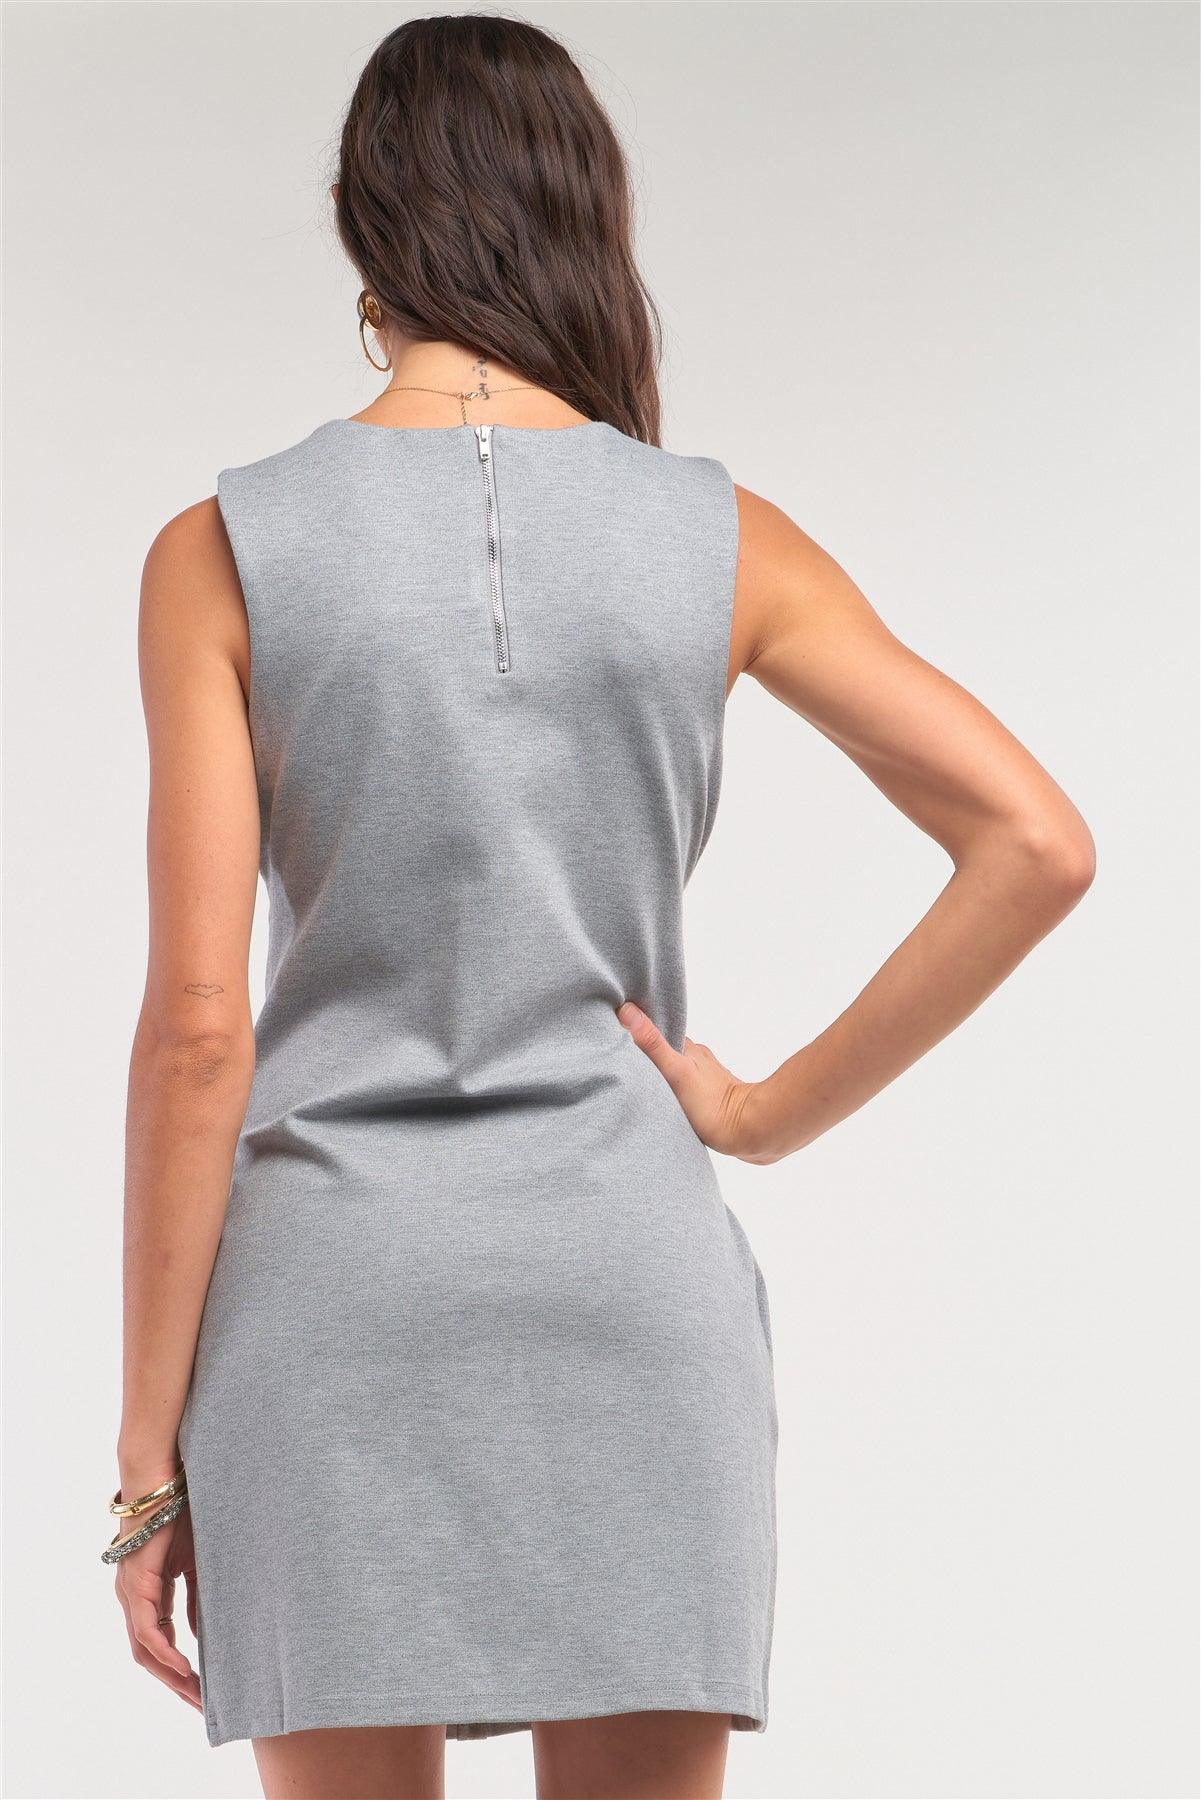 Heather Grey Sleeveless Round Neck Self-Tie Front Detail Fitted Mini Dress /1-2-2-1